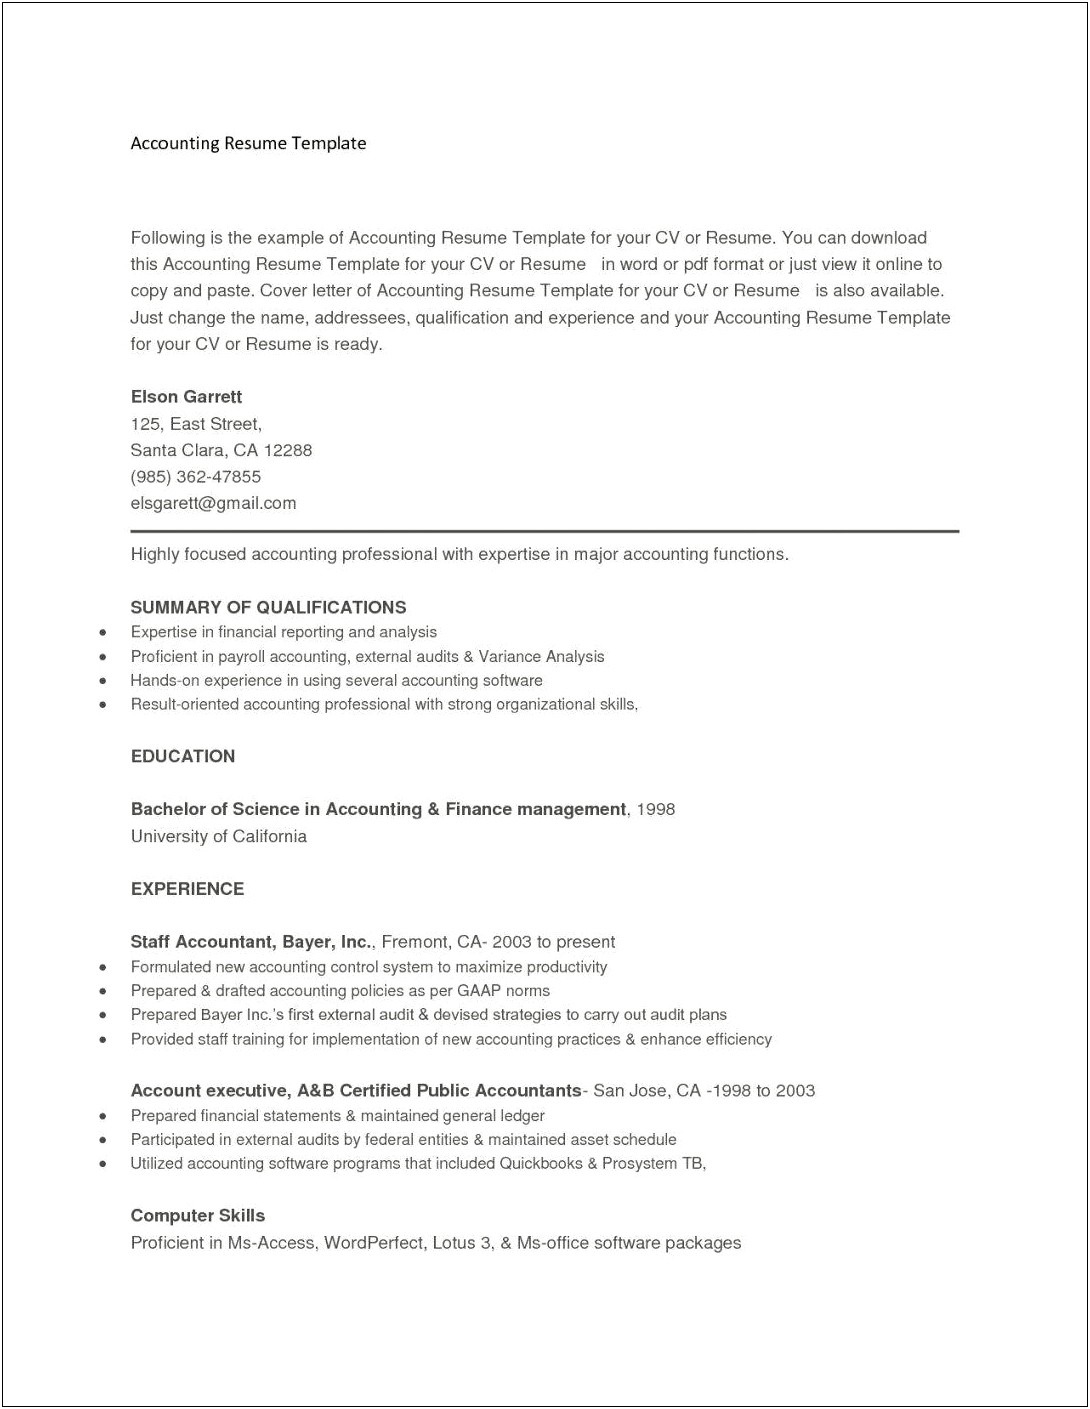 Free Resume Templates You Can Copy And Paste